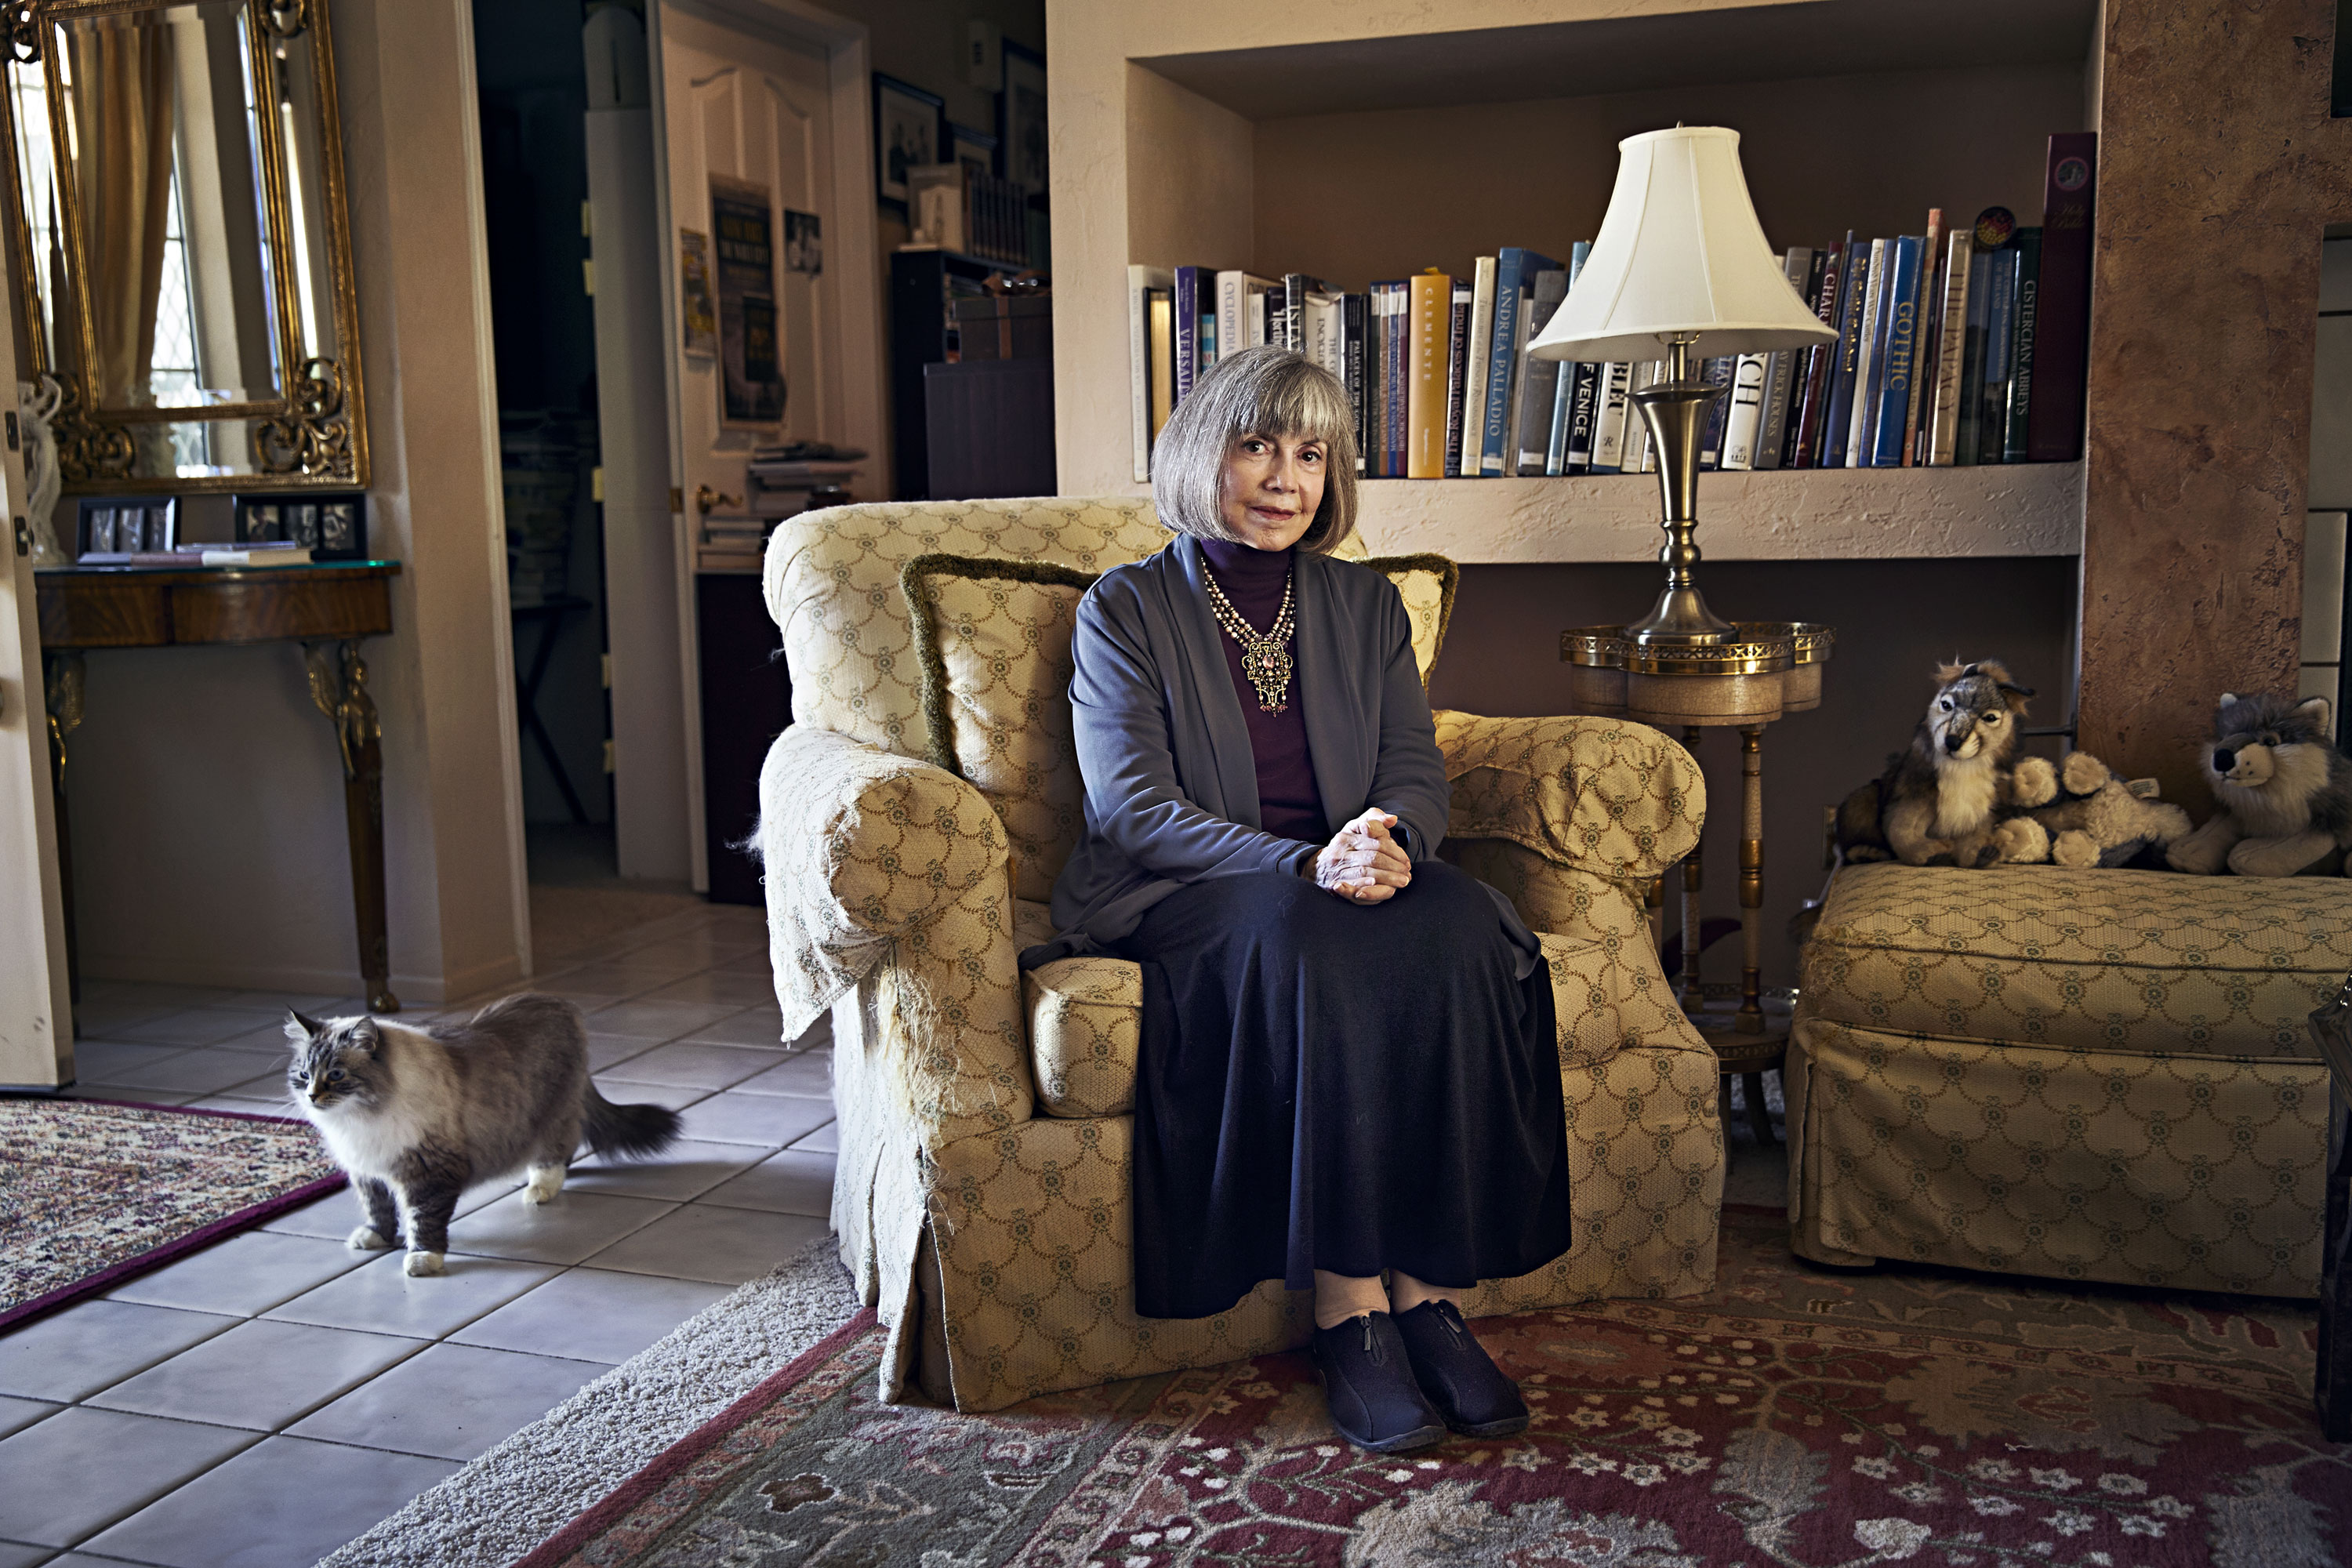 Author Anne Rice photographed at her home in Palm Desert, CA on October 16th, 2014. (Kenneth O’Halloran for TIME)